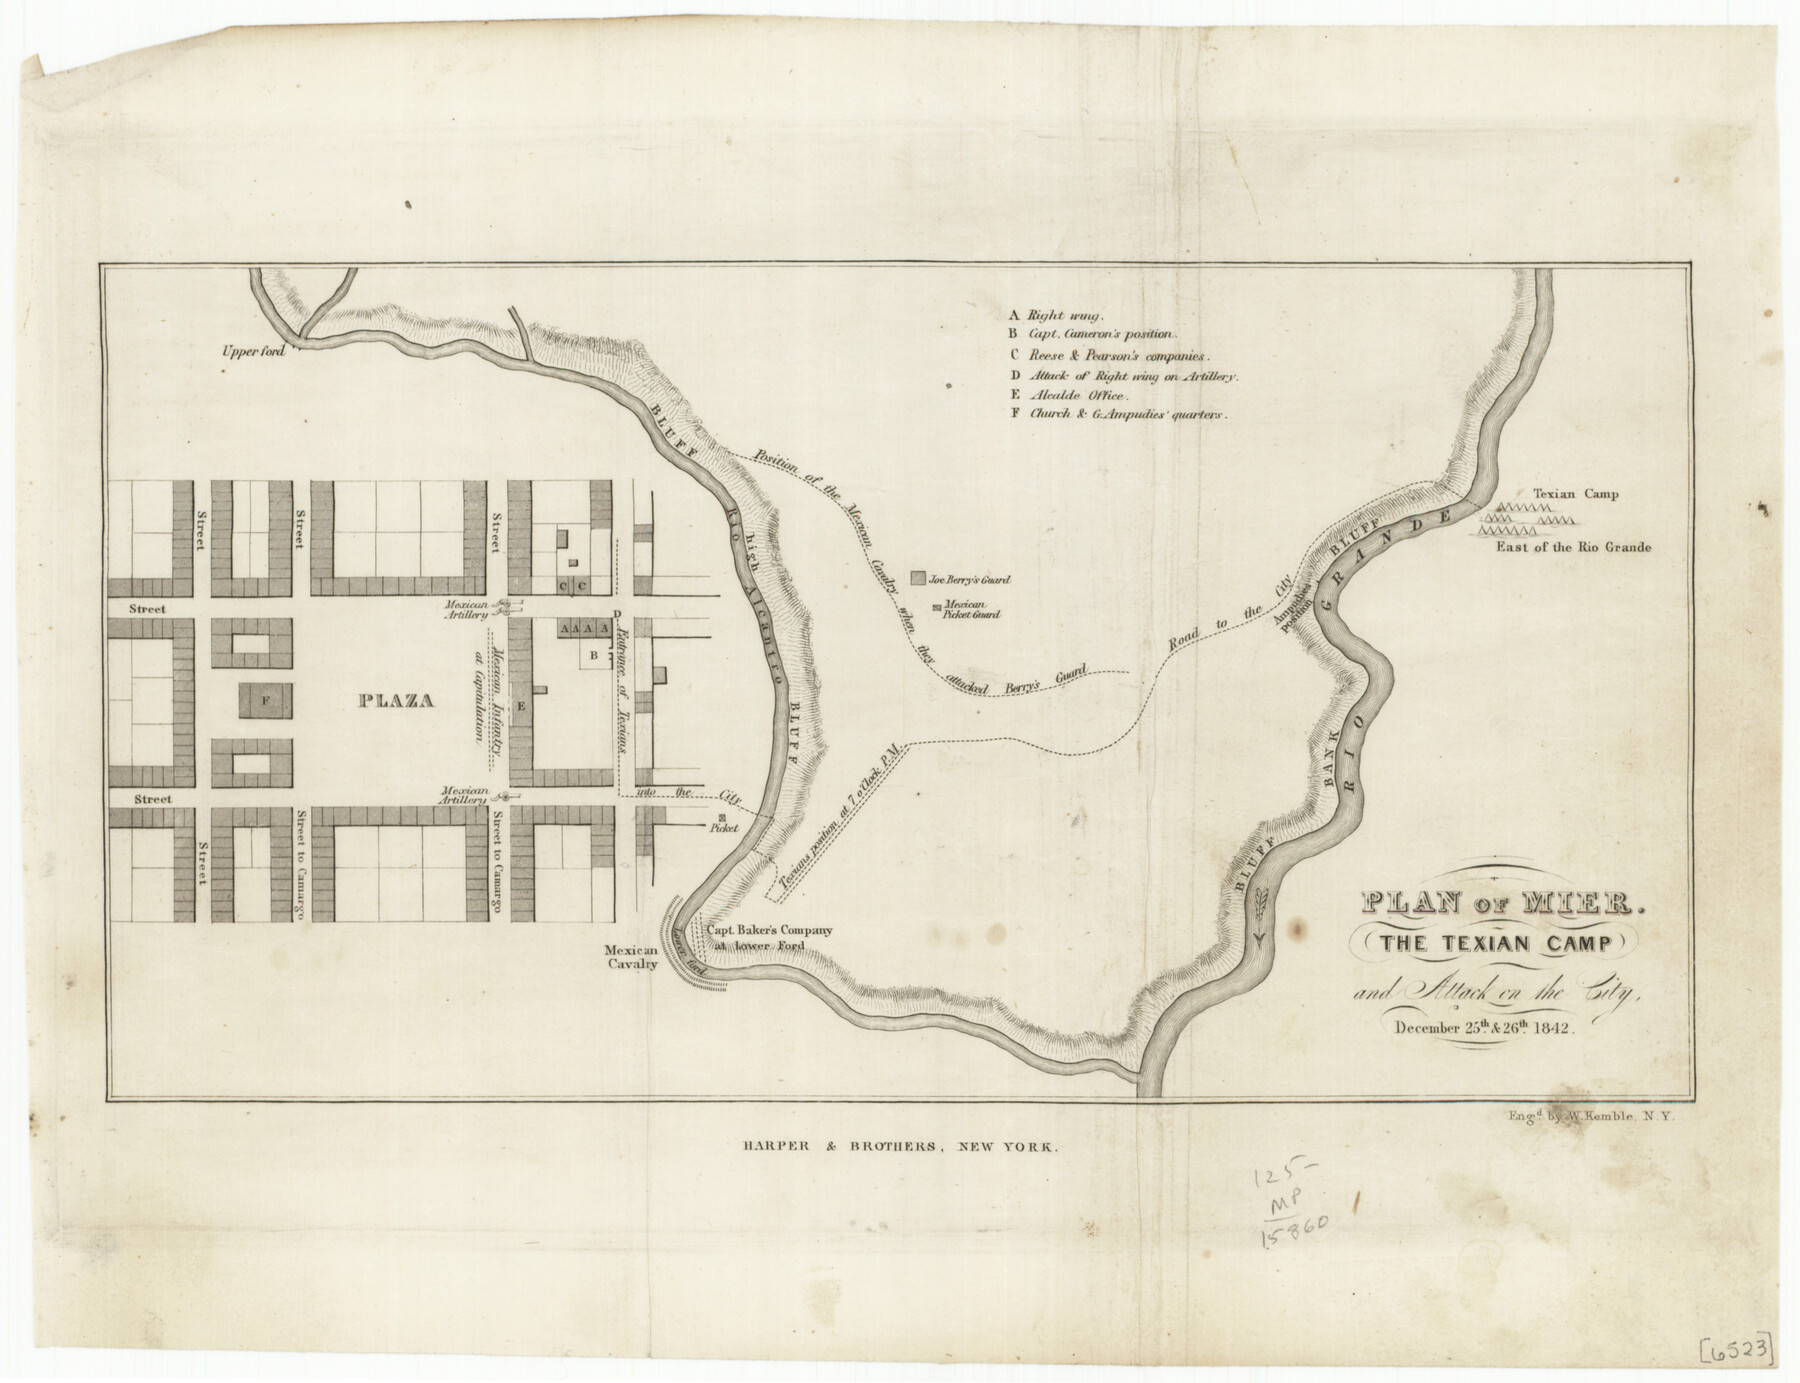 76305, Plan of Mier.  The Texian Camp and Attack on the City, Texas State Library and Archives